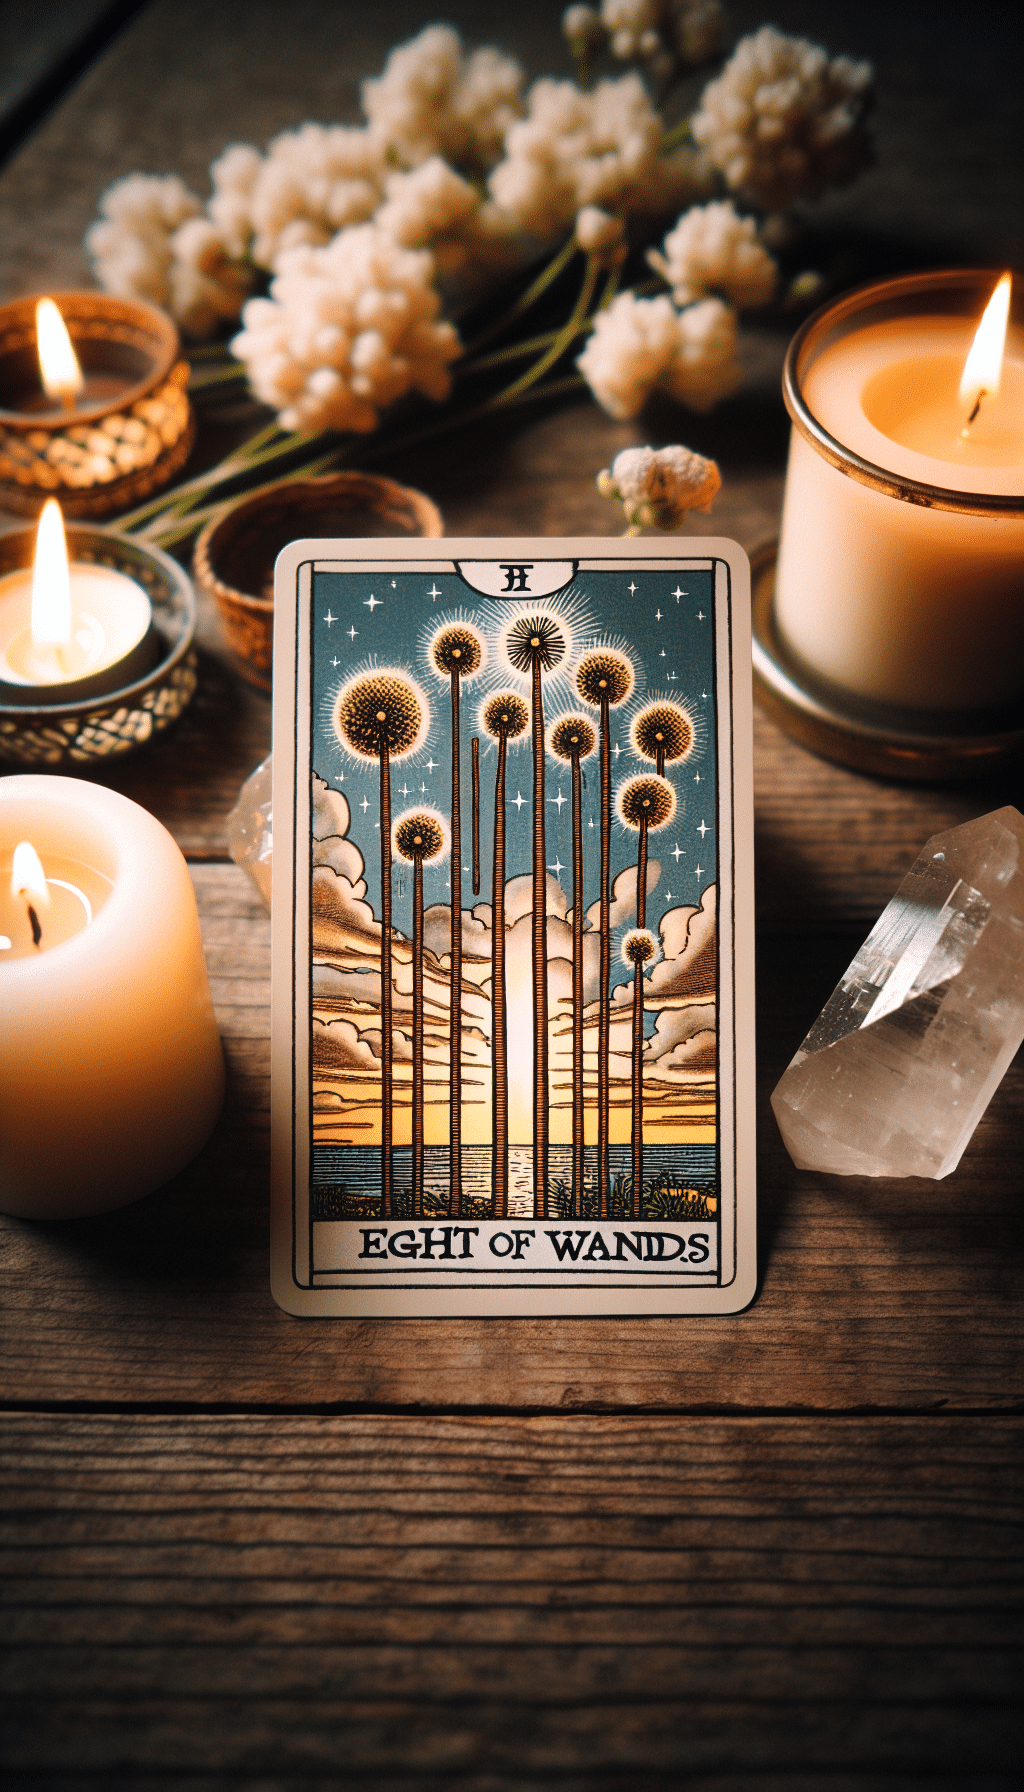 Harnessing the Speed and Power of the Eight of Wands